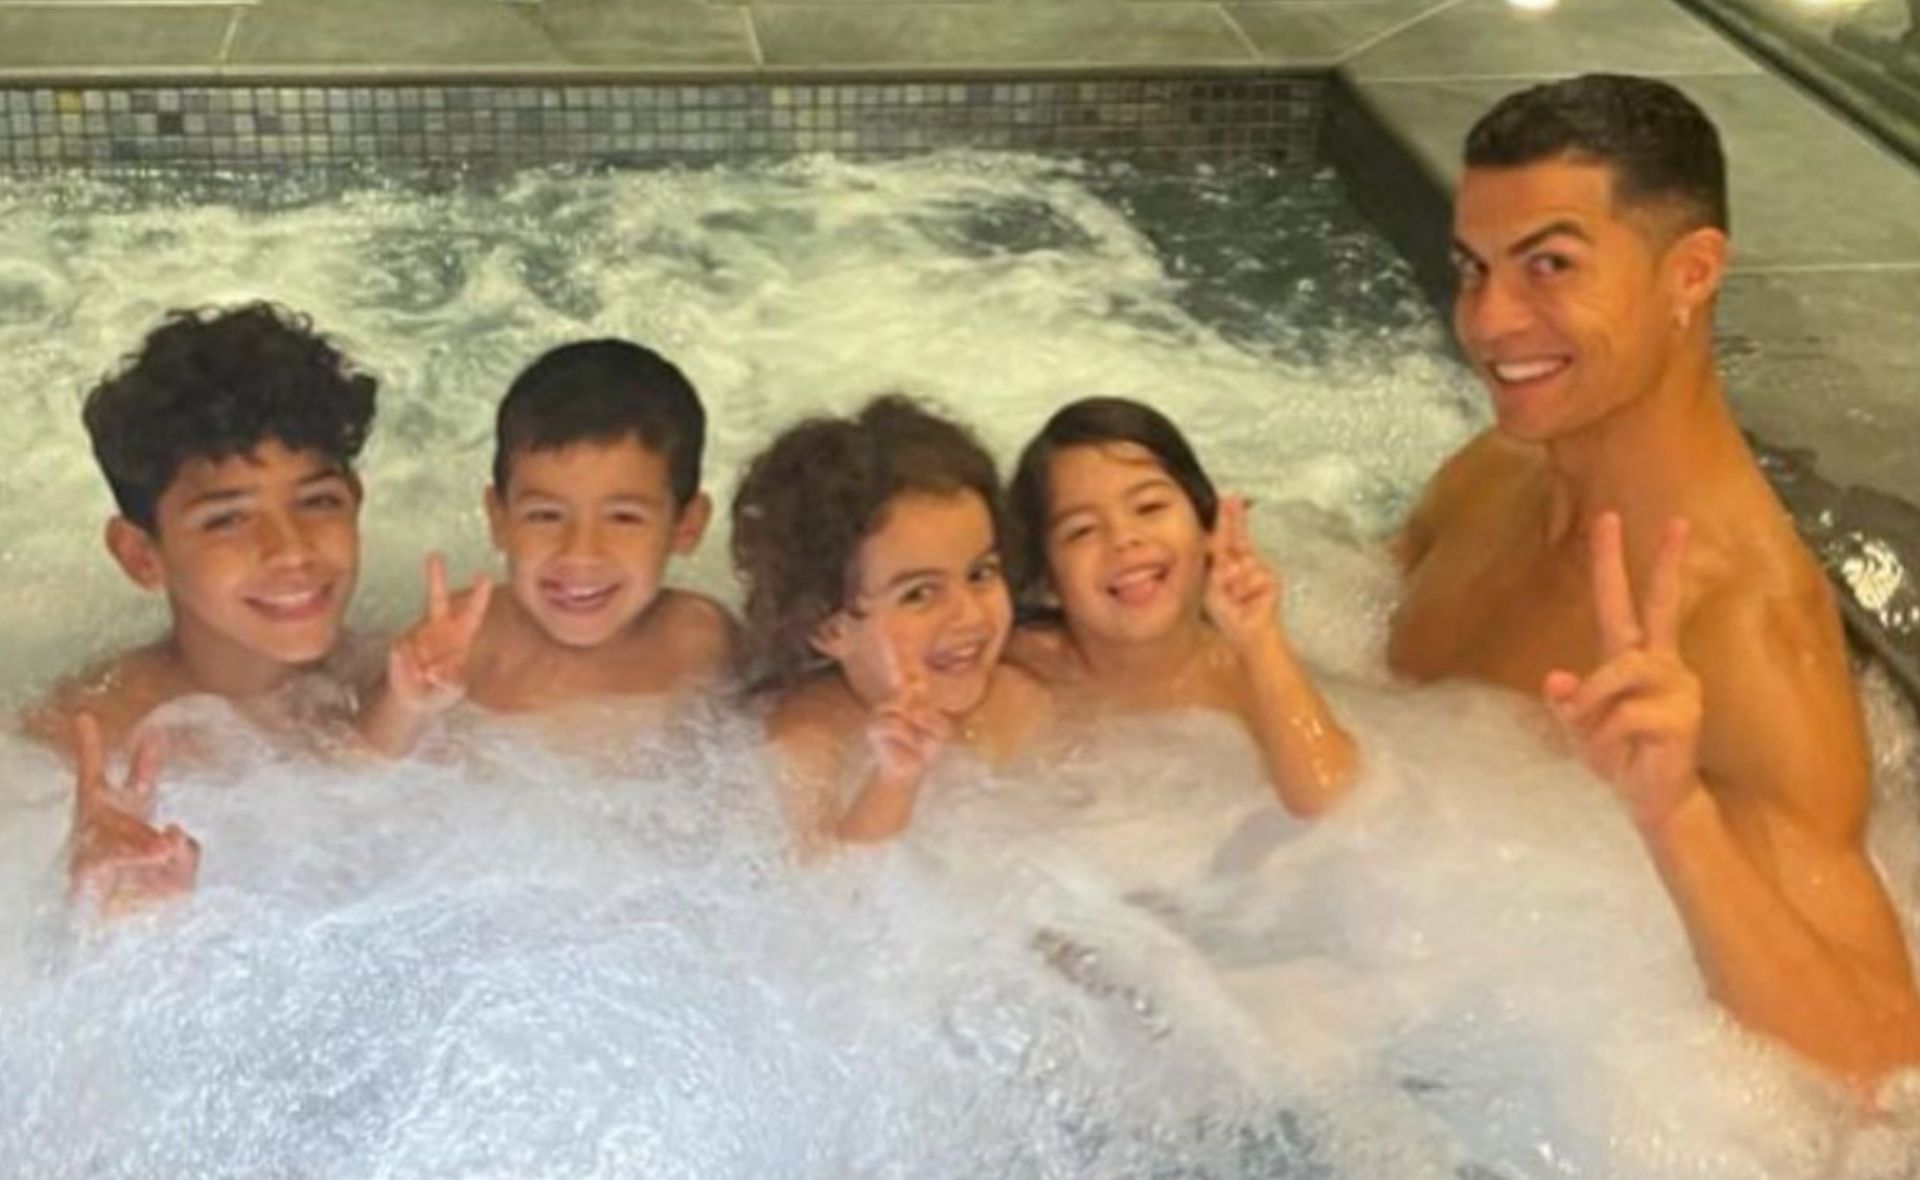 A father’s heartache: Cristiano Ronaldo’s non-traditional family dynamic explained after losing his newborn son